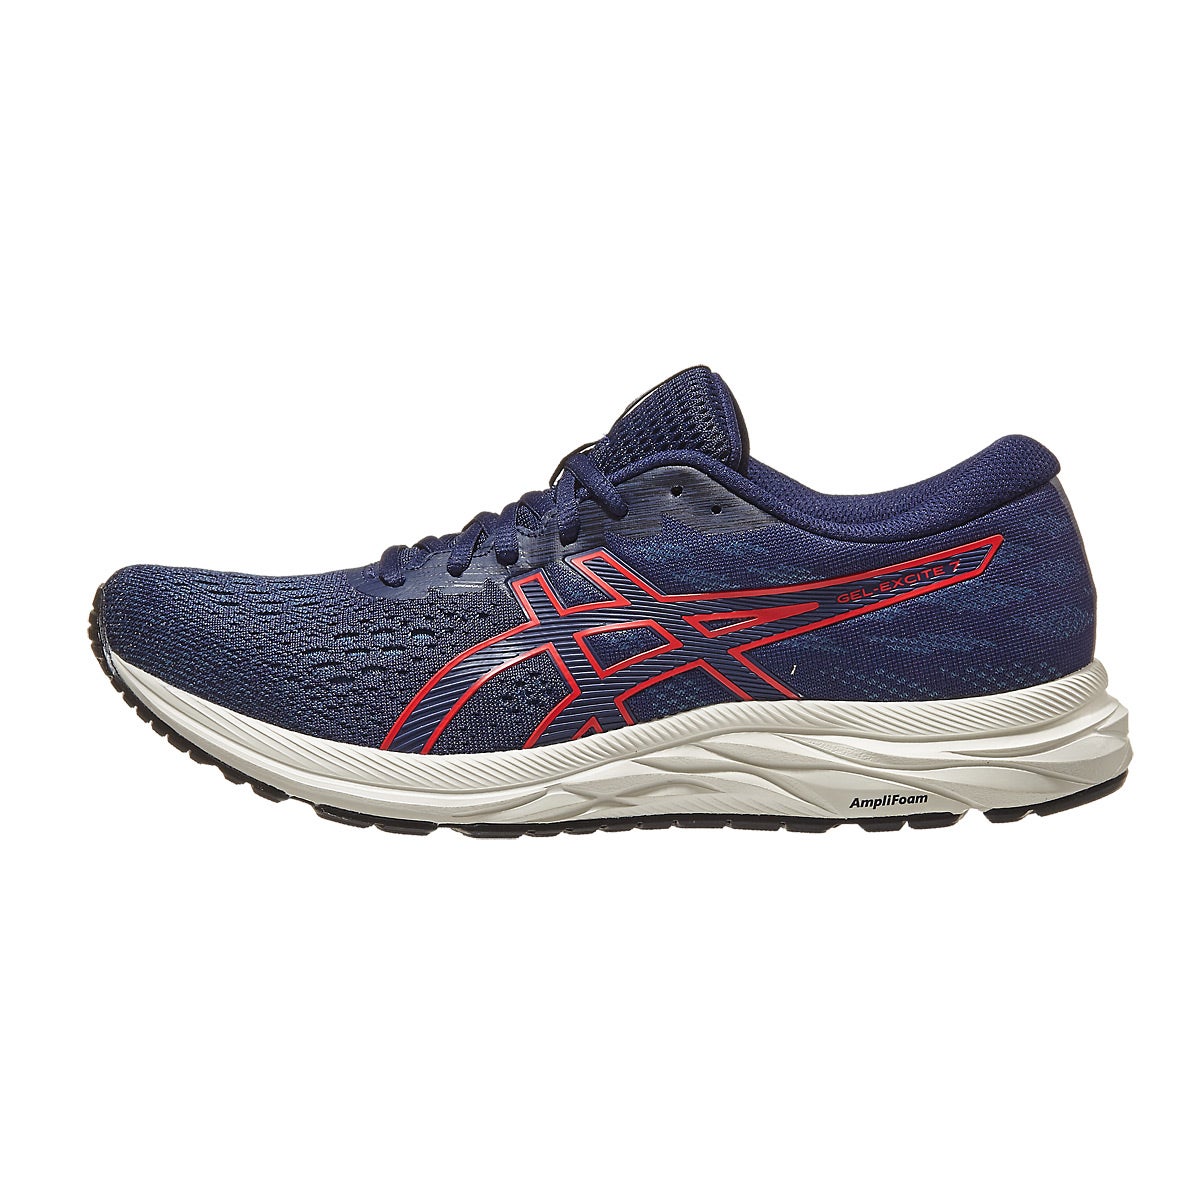 ASICS Gel Excite 7 Men's Shoes Peacoat/Classic Red 360° View | Running ...